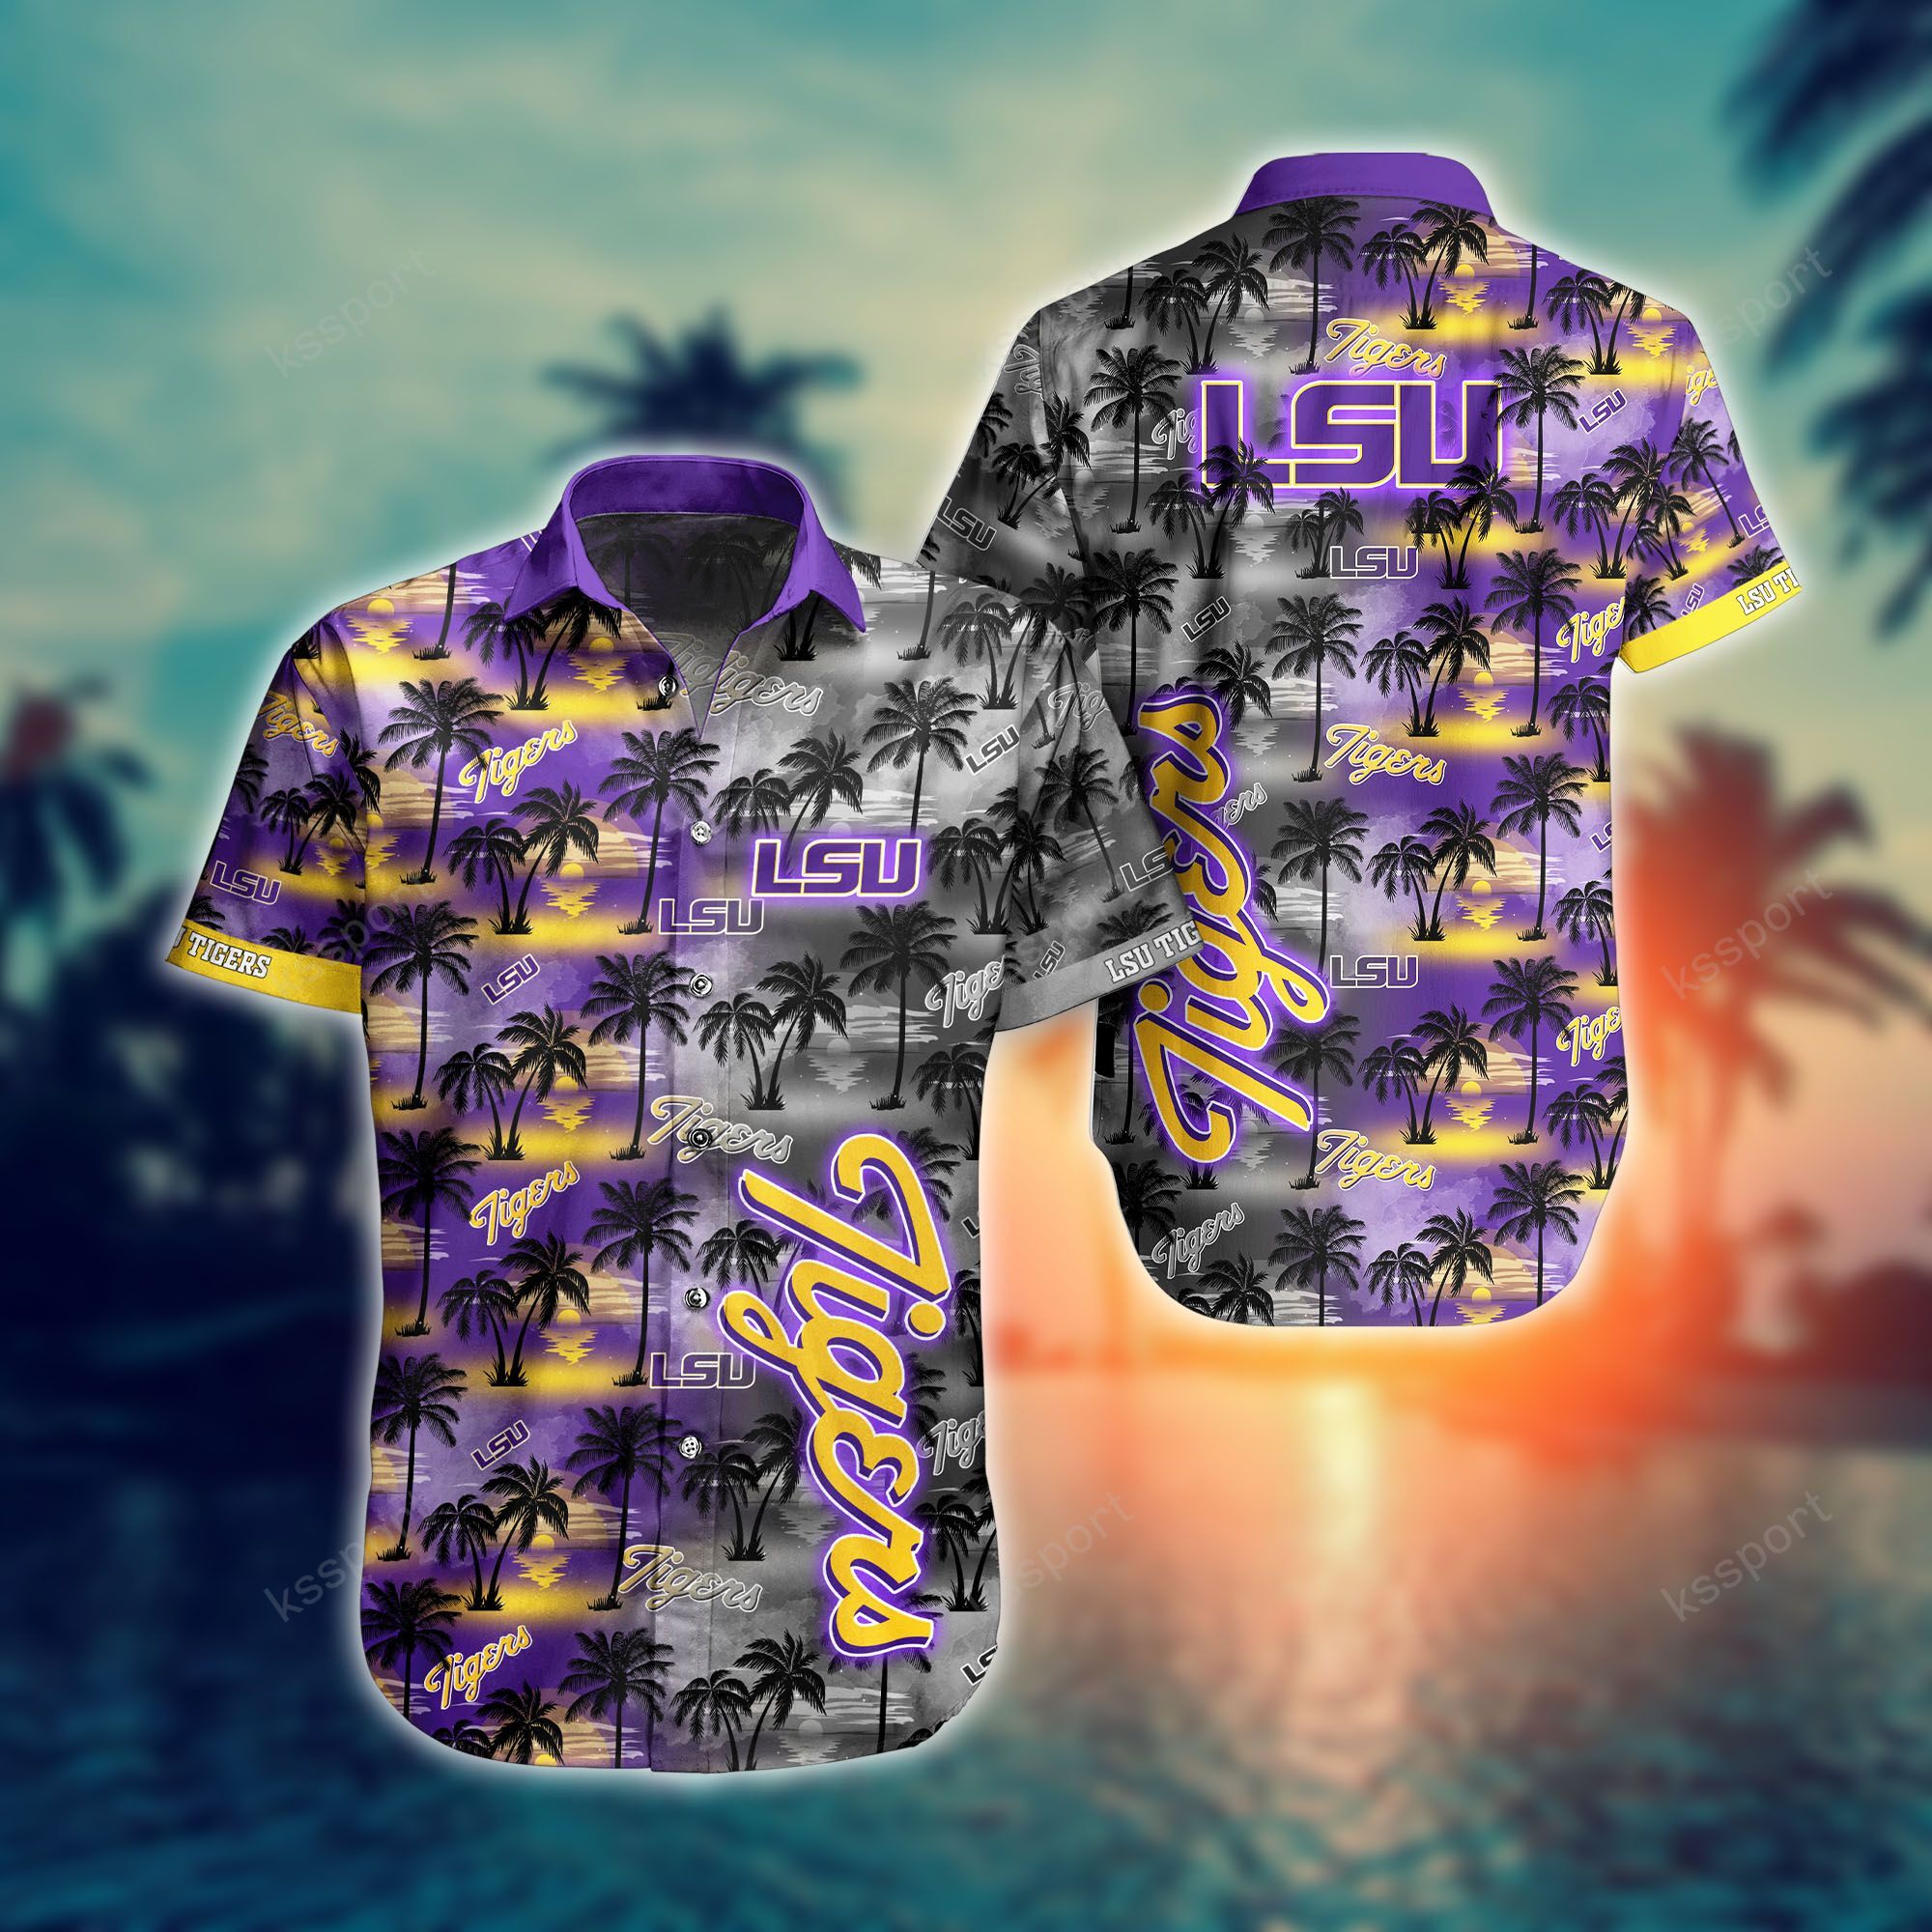 Treat yourself to a cool Hawaiian set today! 31